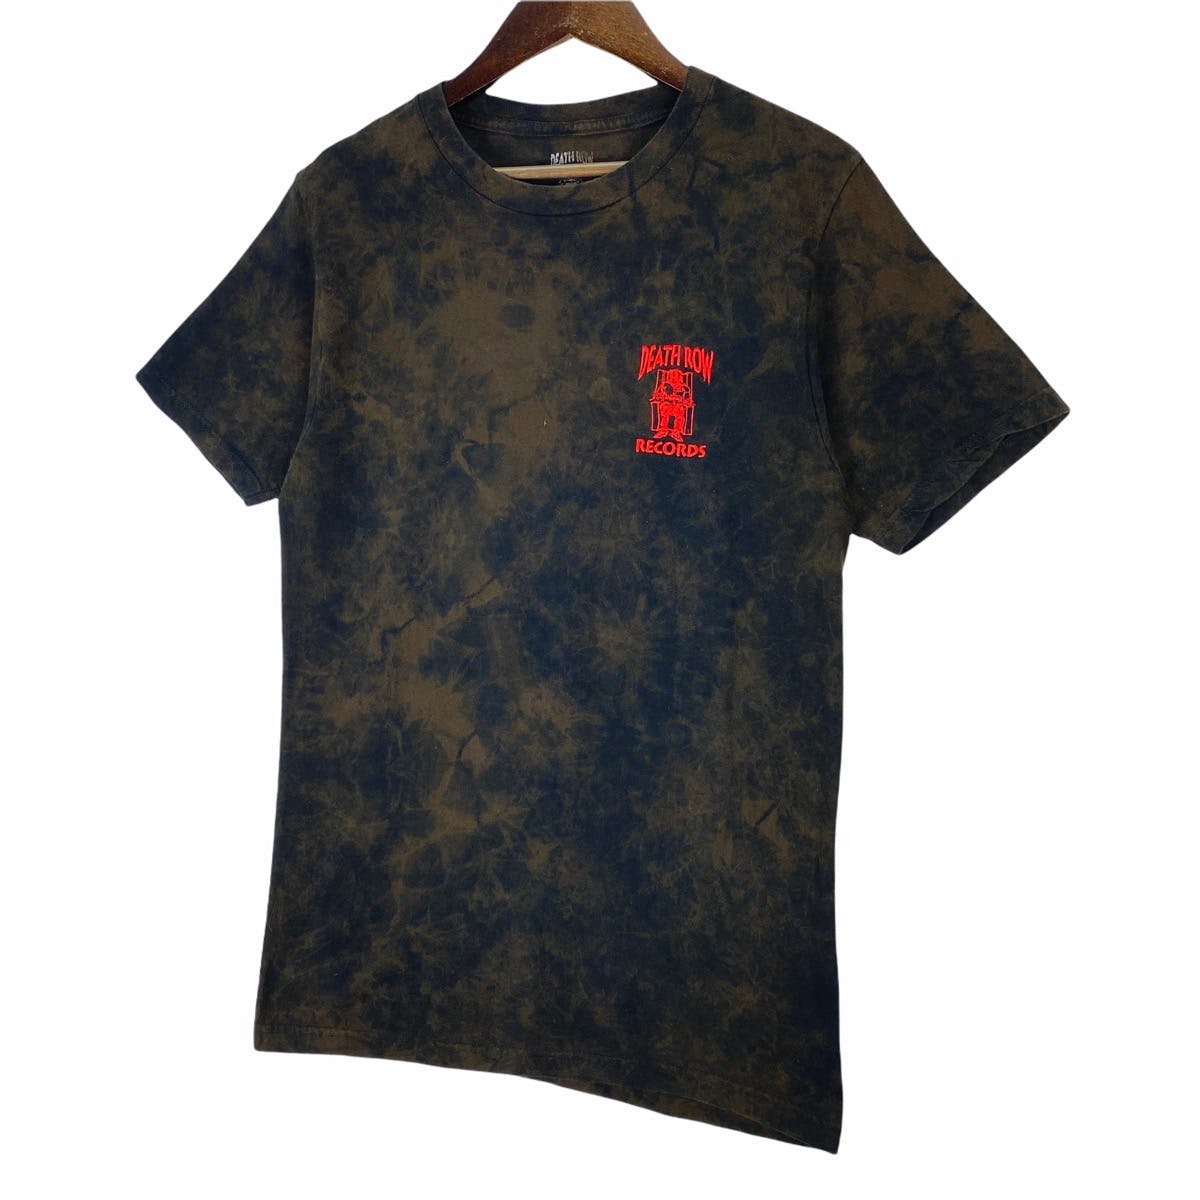 Death Row Records Acid Wash Embroidery T Shirt - 3